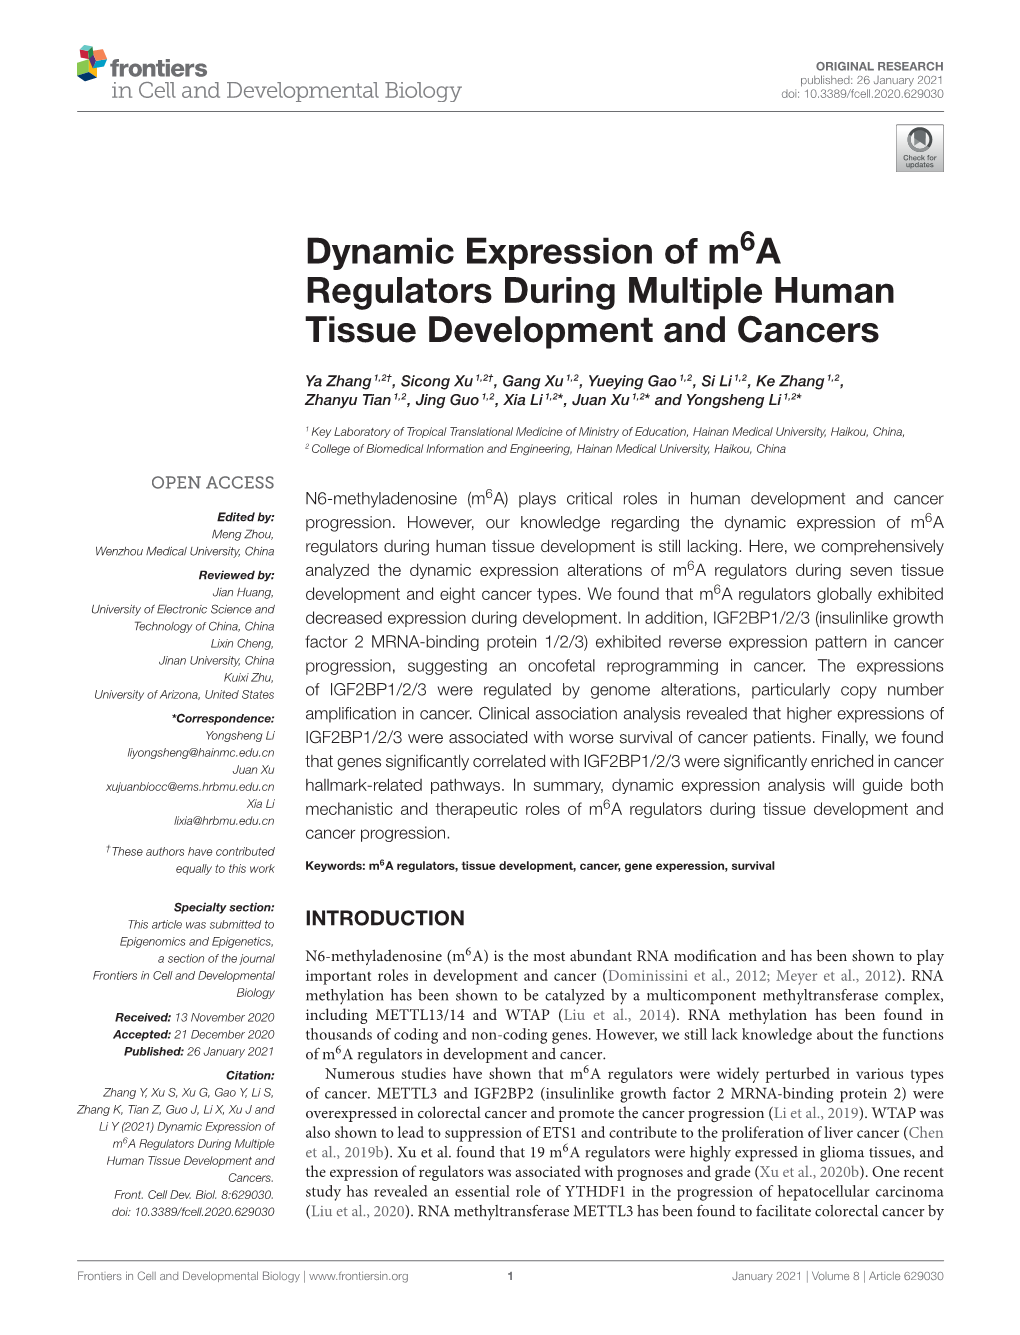 Dynamic Expression of M6a Regulators During Multiple Human Tissue Development and Cancers